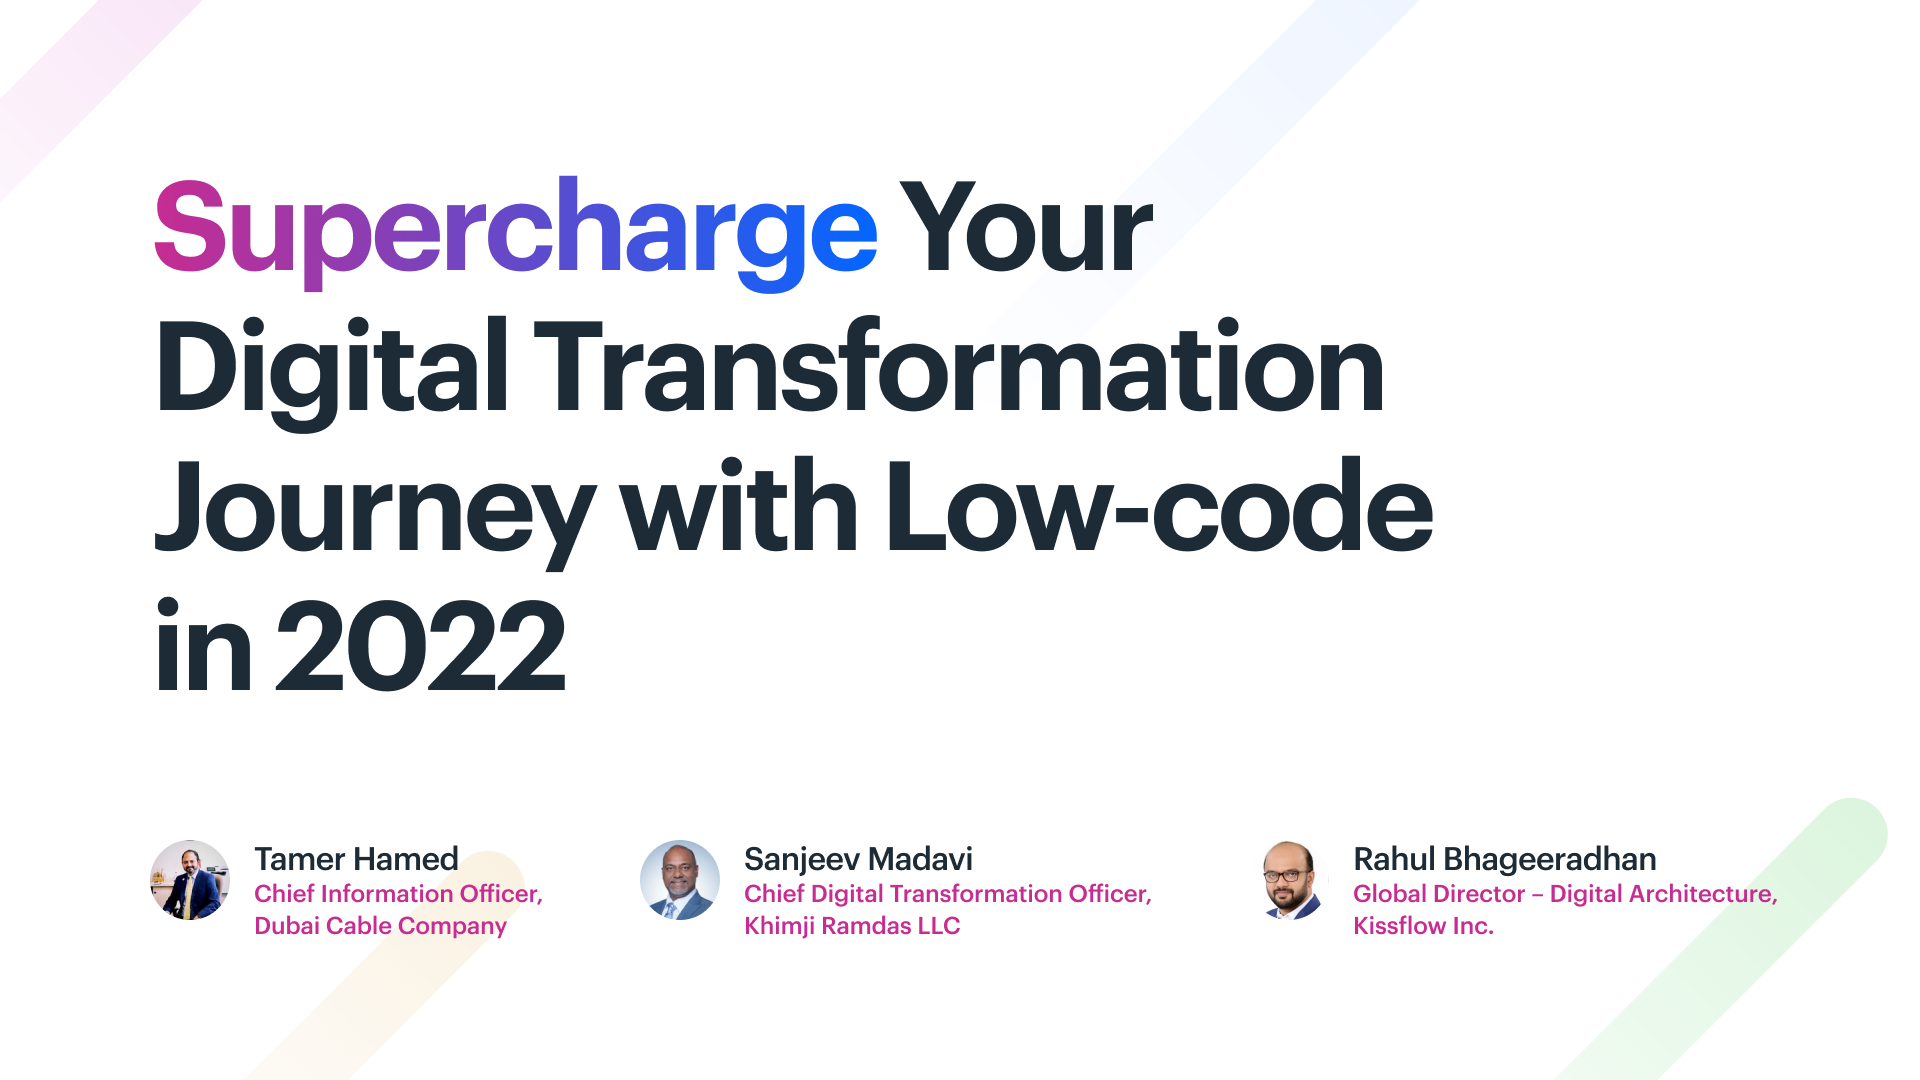 Supercharge Your Digital Transformation Journey with Low-code